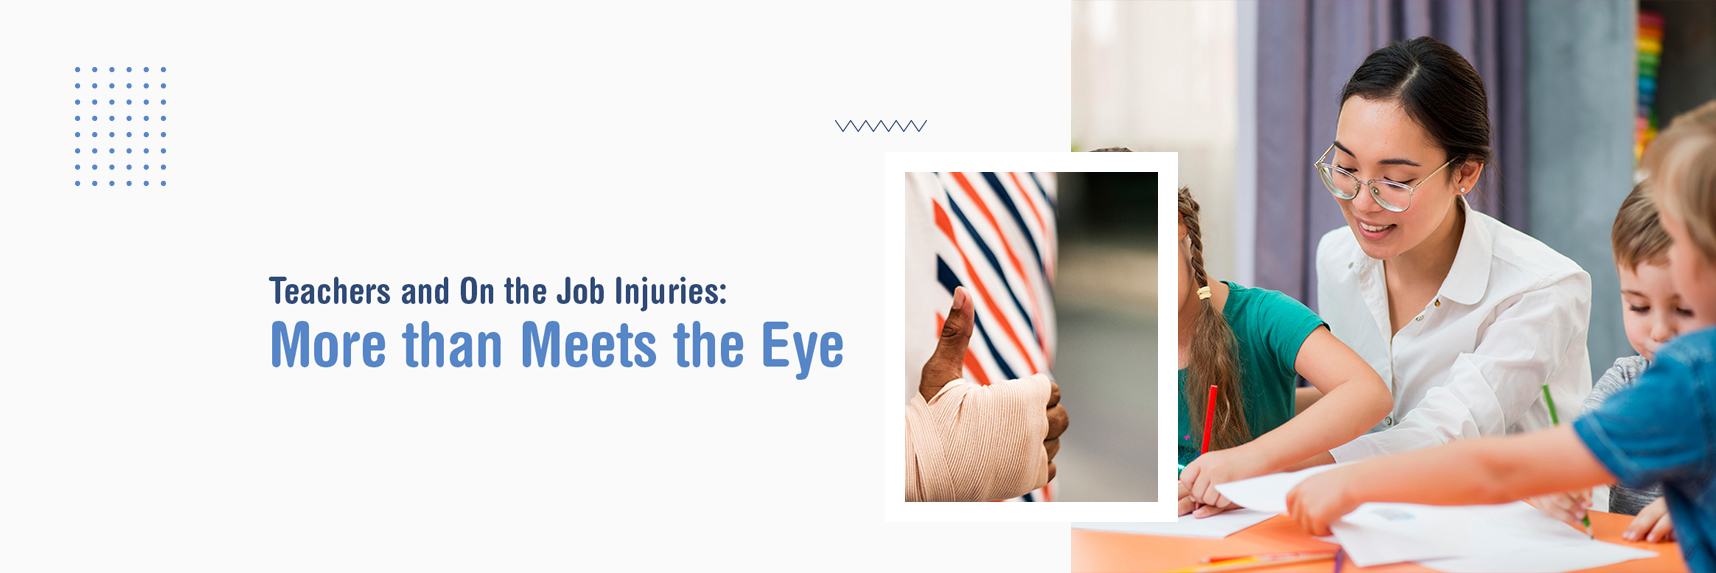 Teachers and On the Job Injuries: More than Meets the Eye